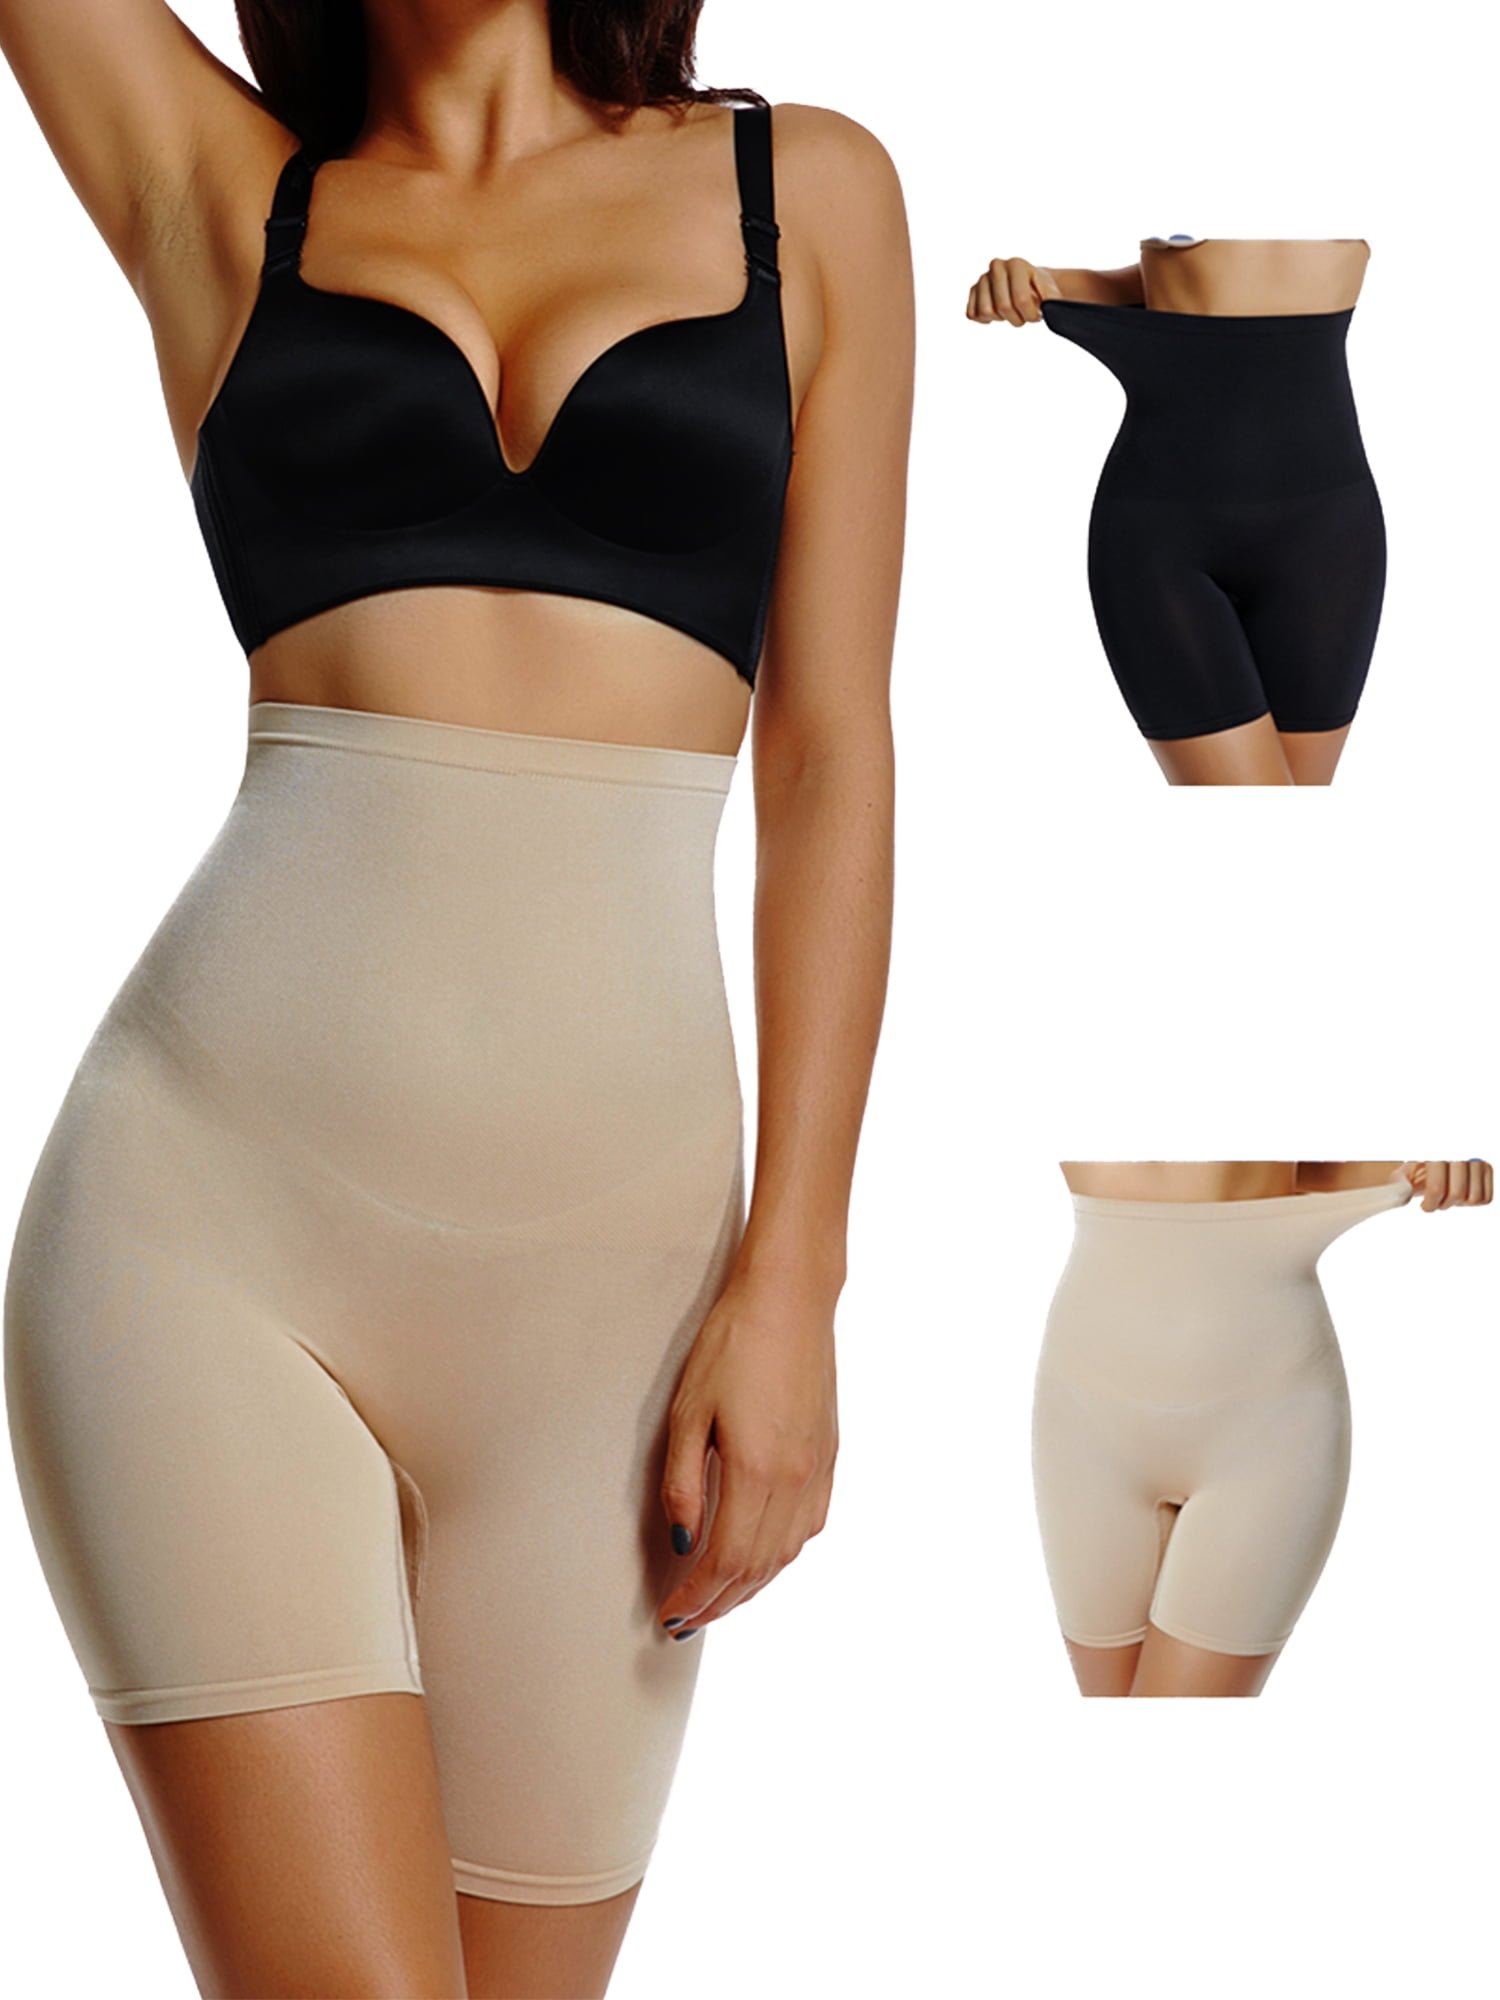  DAISHA Women's High Waist Thigh Slimmer Shapewear Spanks  Shorts,Firm Tummy Control C-Section Recovery Underwear for Women. Beige :  Clothing, Shoes & Jewelry